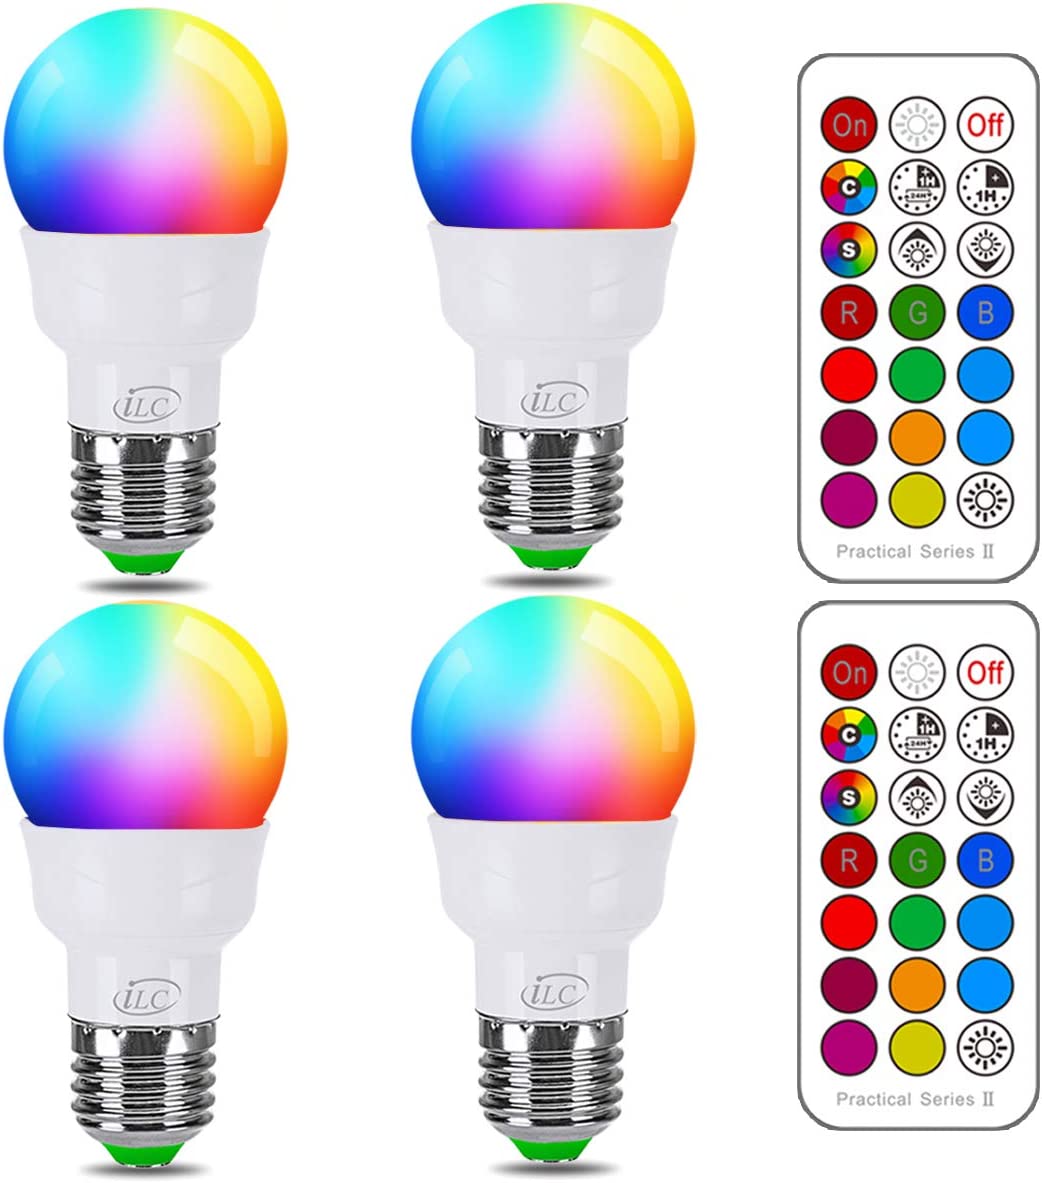 LED Light Bulb, Color Changing Light Bulb, 40W Equivalent, 450LM, 2700K Warm White 5W E26 Screw Base RGBW, Flood Light Bulb- 12 Color Choices - Timing Infrared Remote Control (4 Pack)